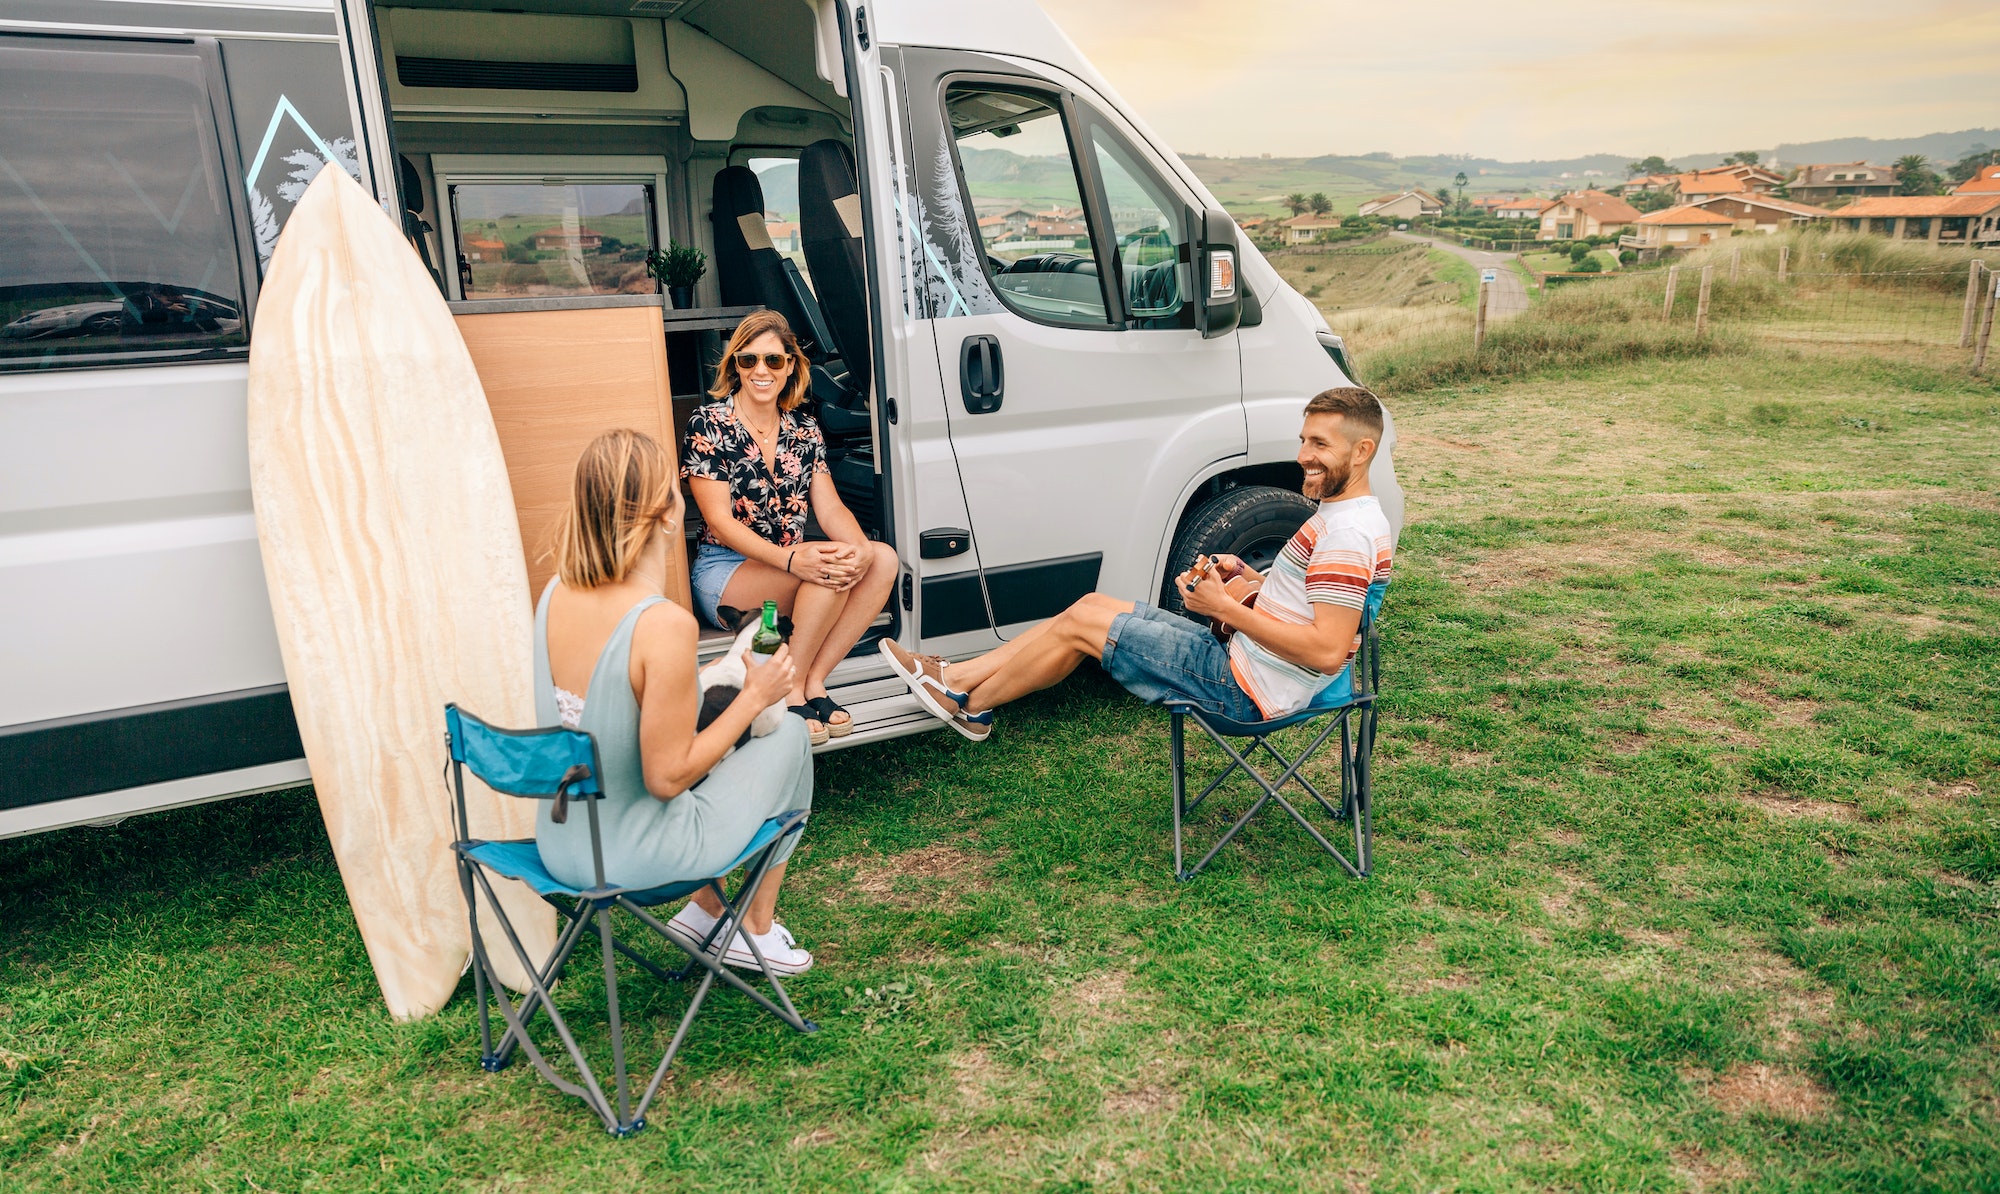 Friends with their dog talking and drinking beer in front of their camper van